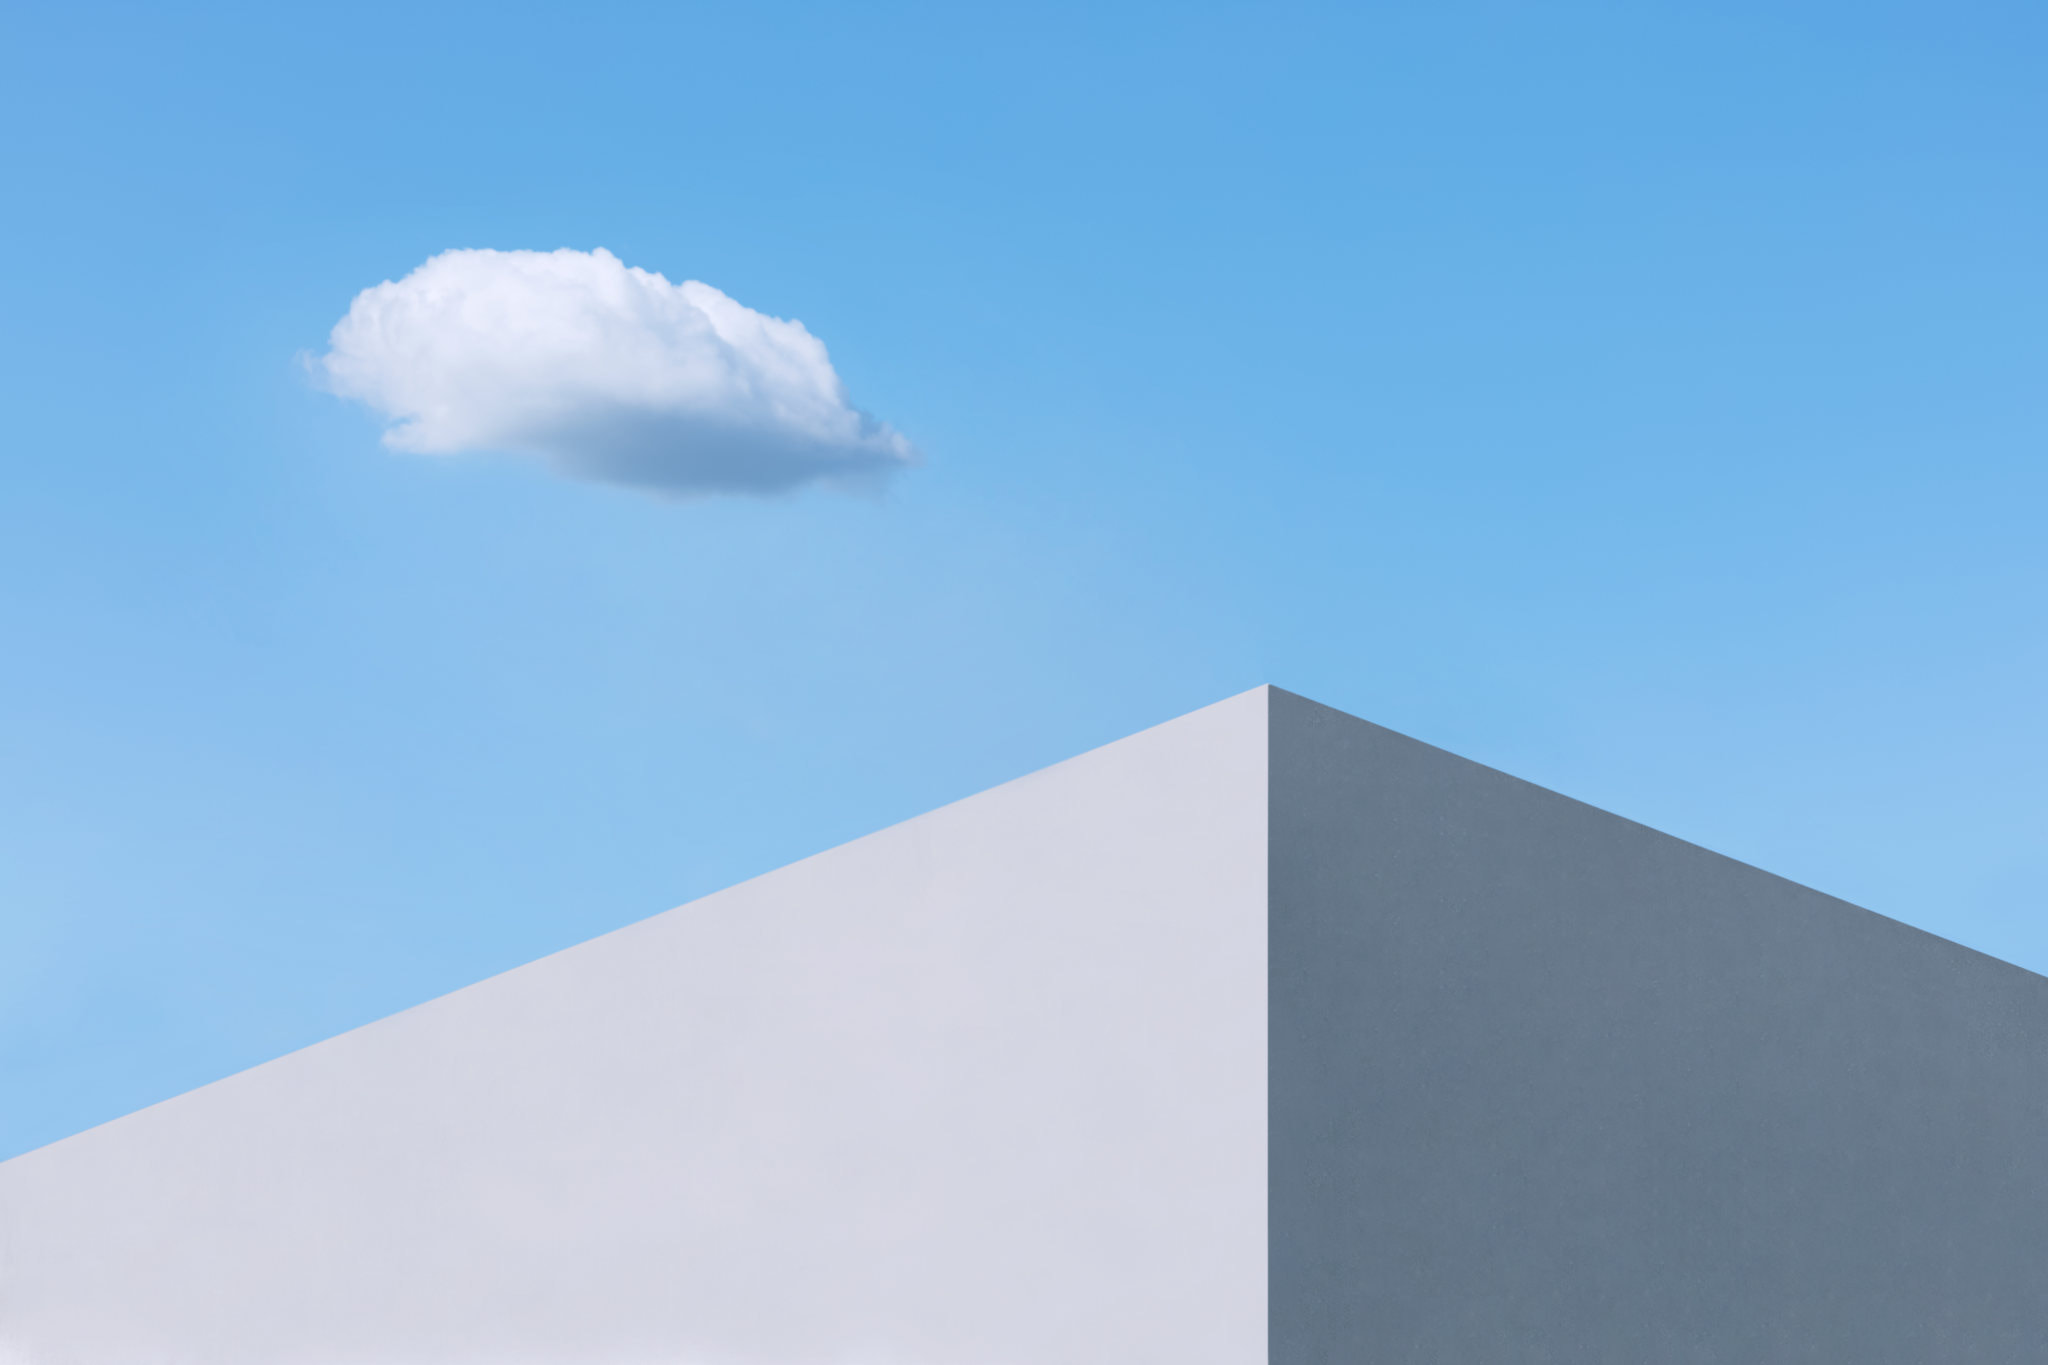 General 2048x1365 building Japan abstract clouds